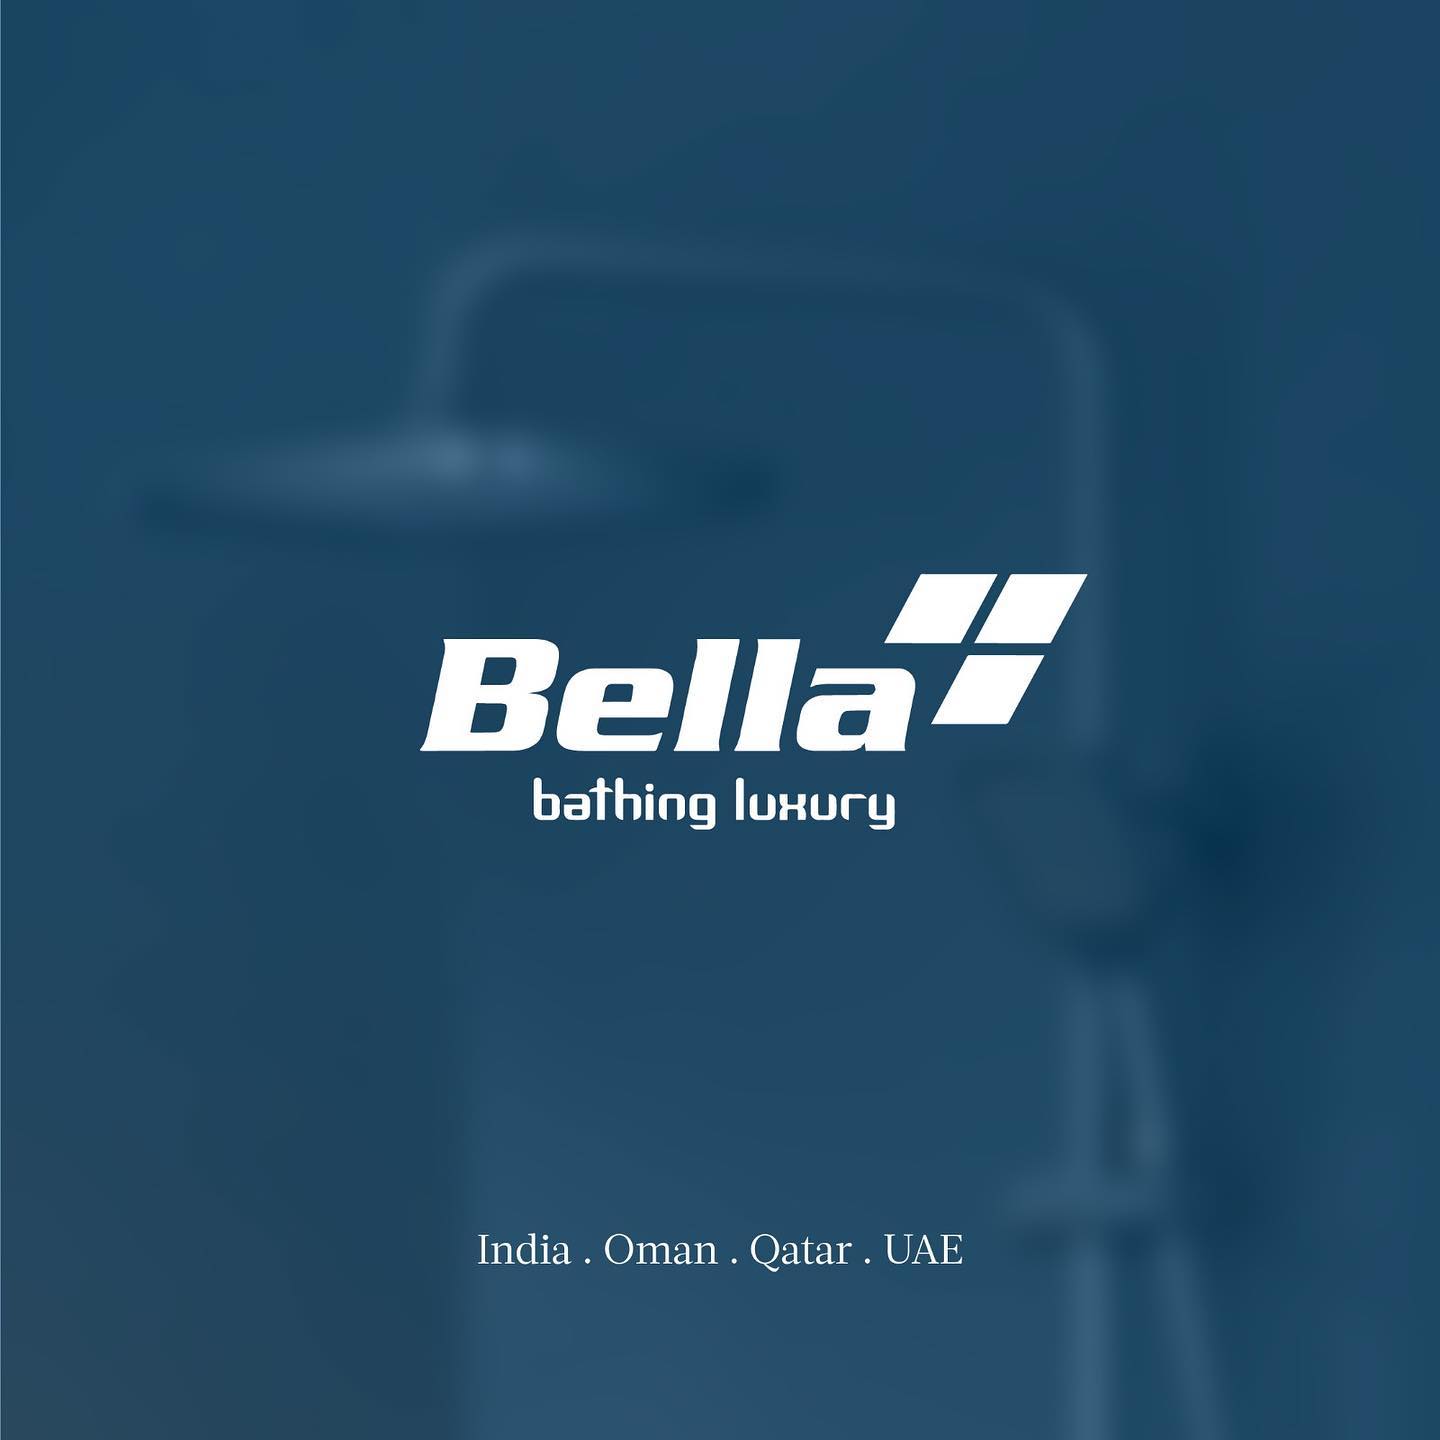 Bella Bathing Luxury Marks 25 Years of Excellence